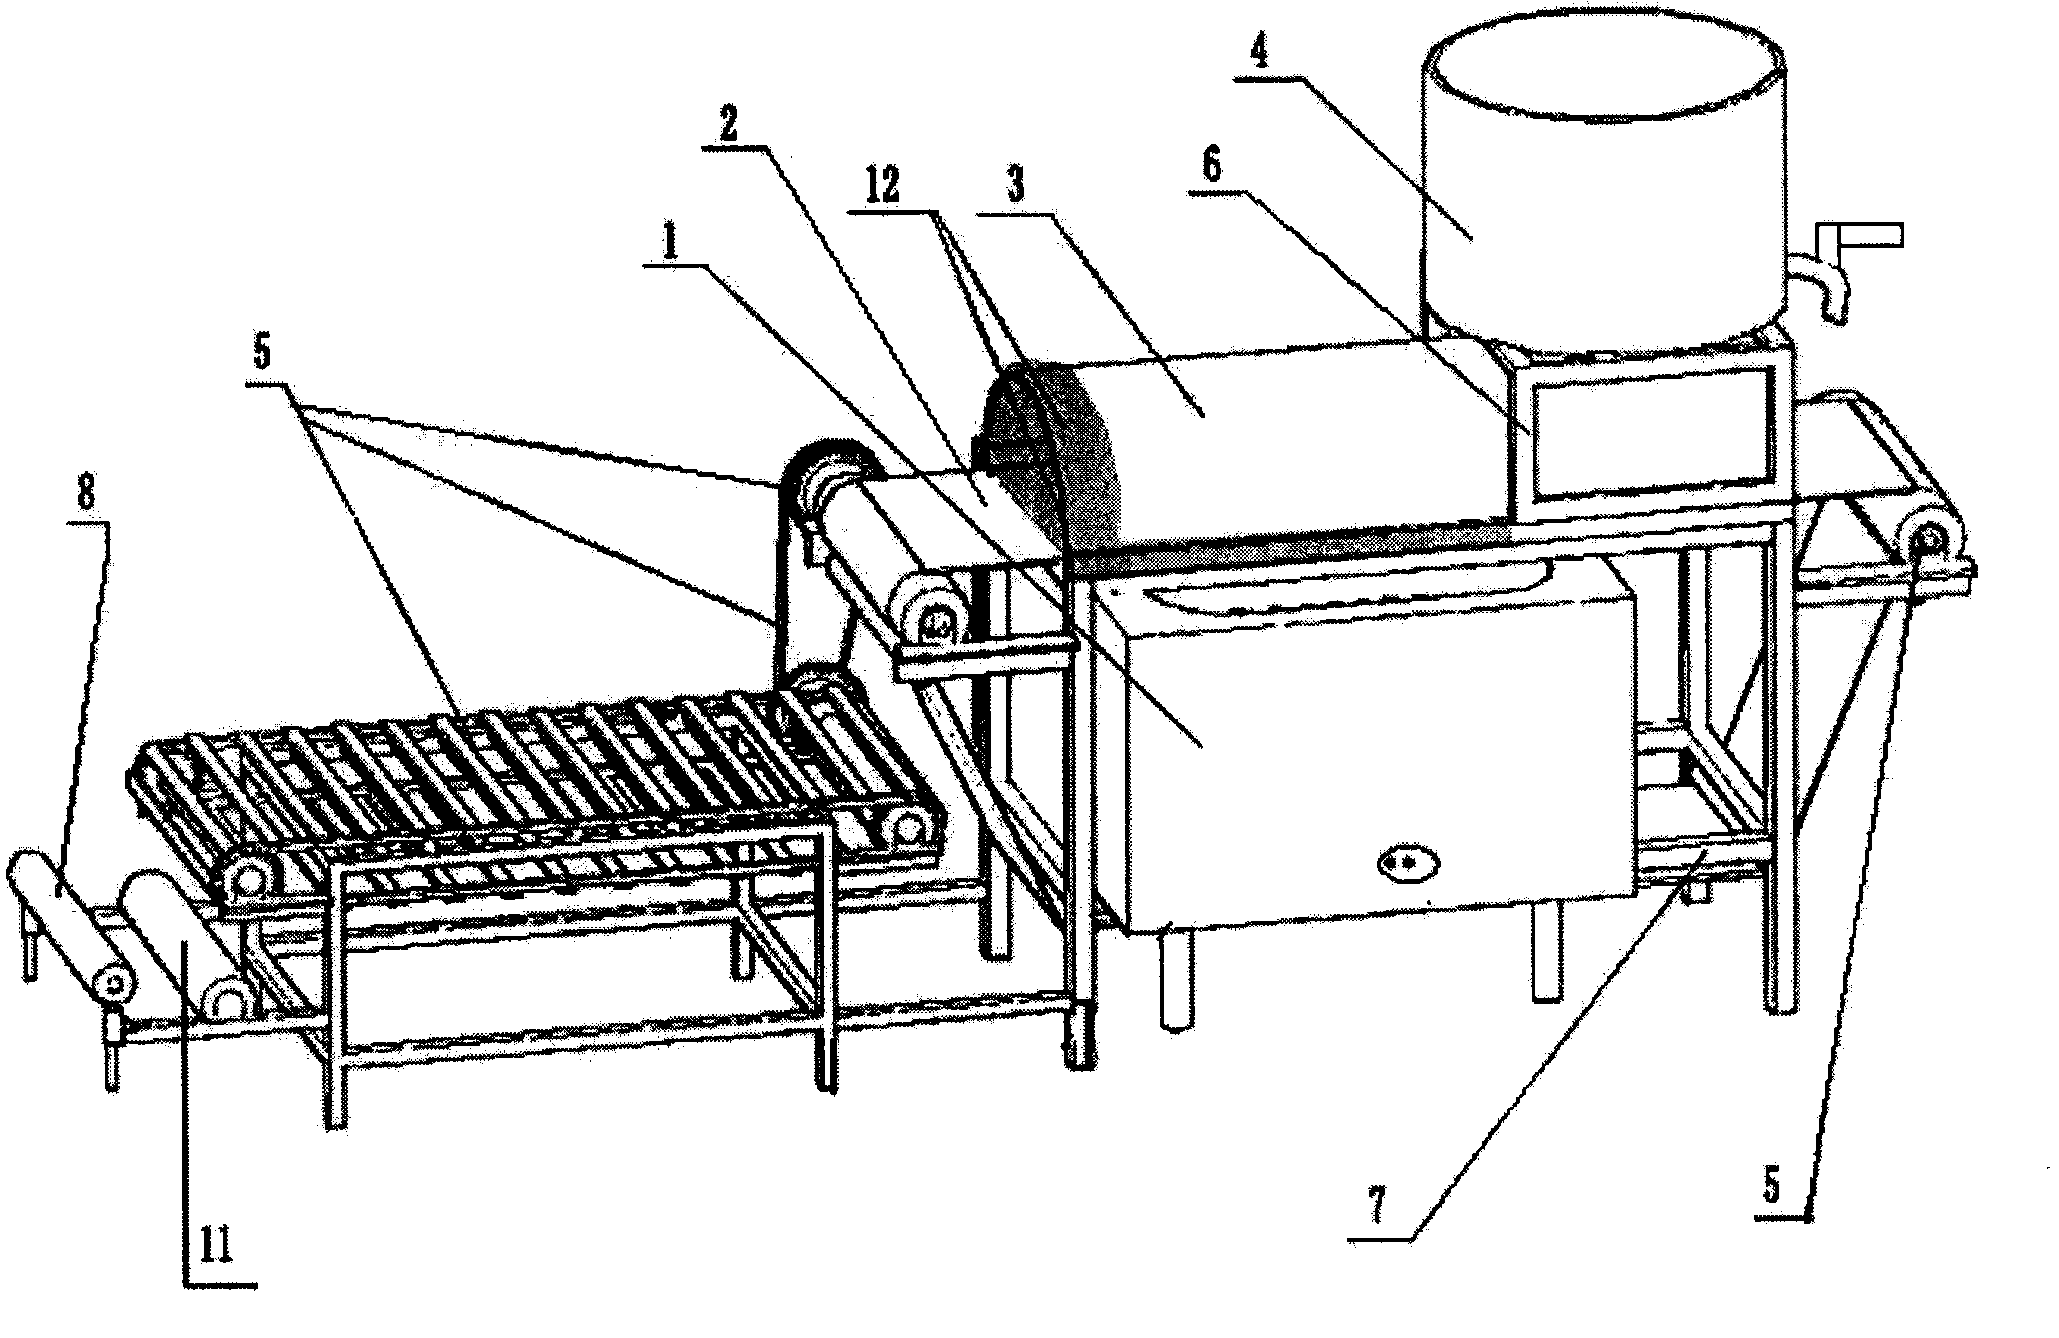 Steam injection device used for steaming rice noodles